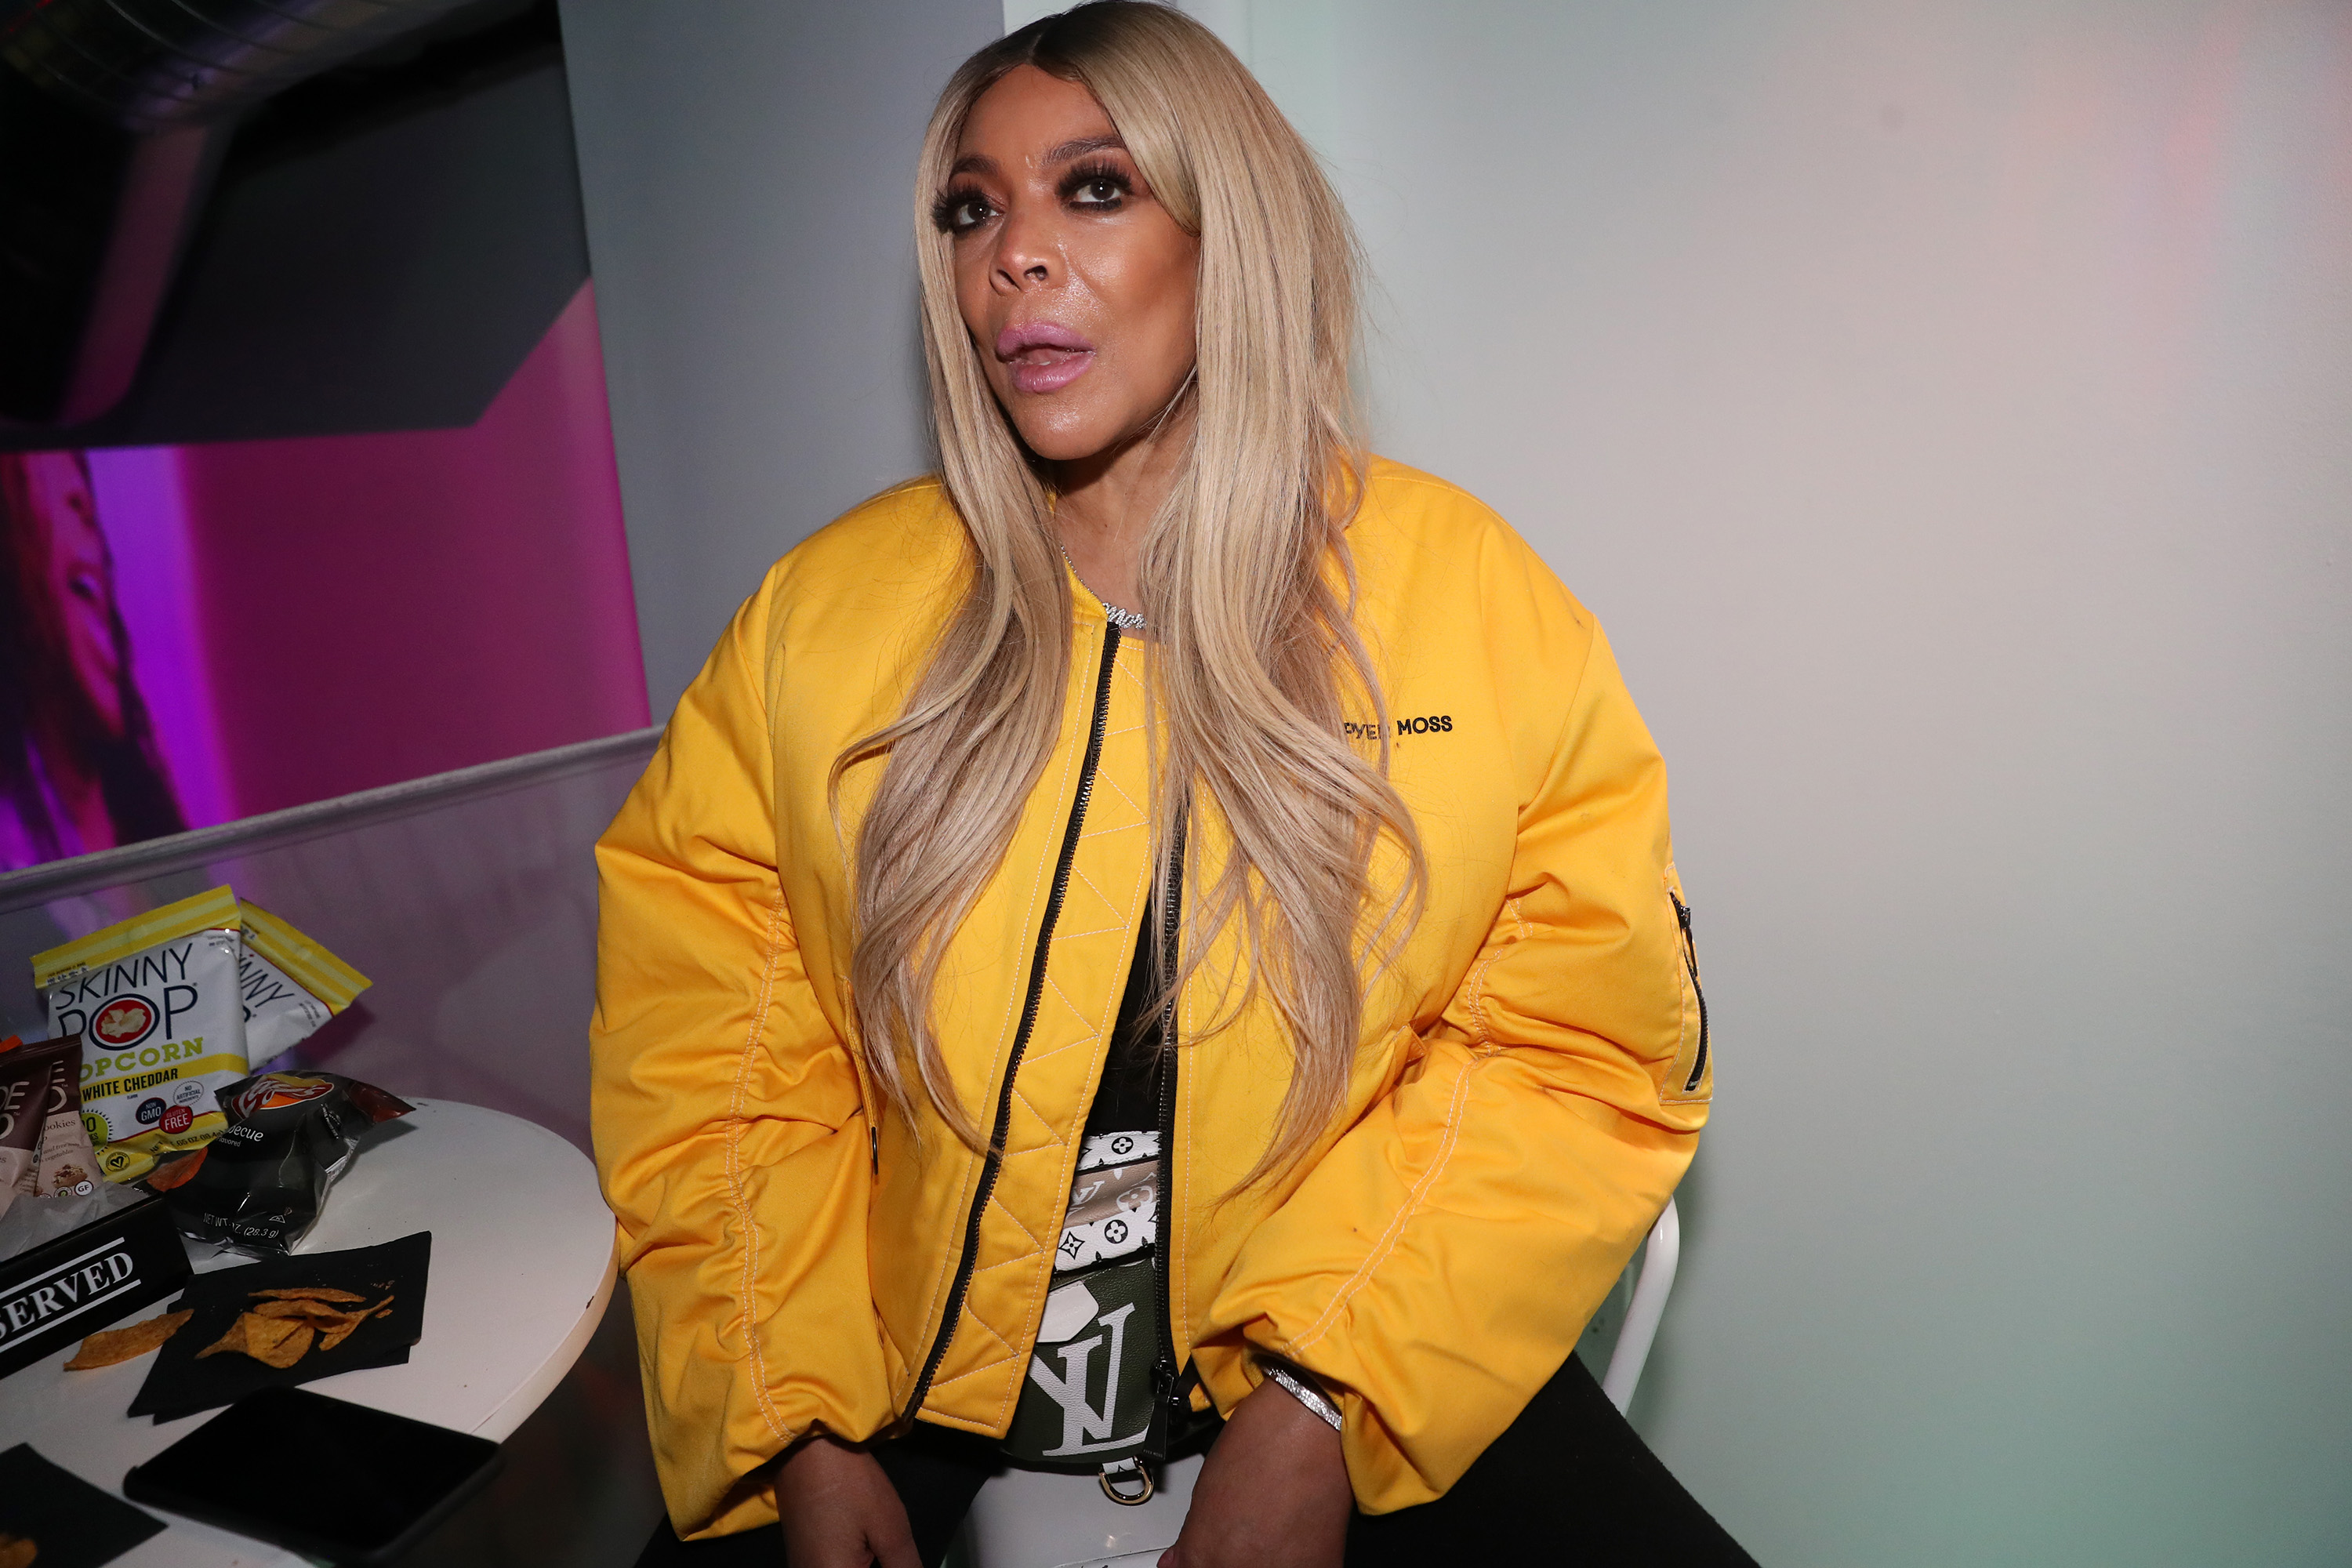 Wendy Williams attends the "New Cash Order" Documentary Screening at Lighthouse International Theater on February 20, 2020 in New York City.